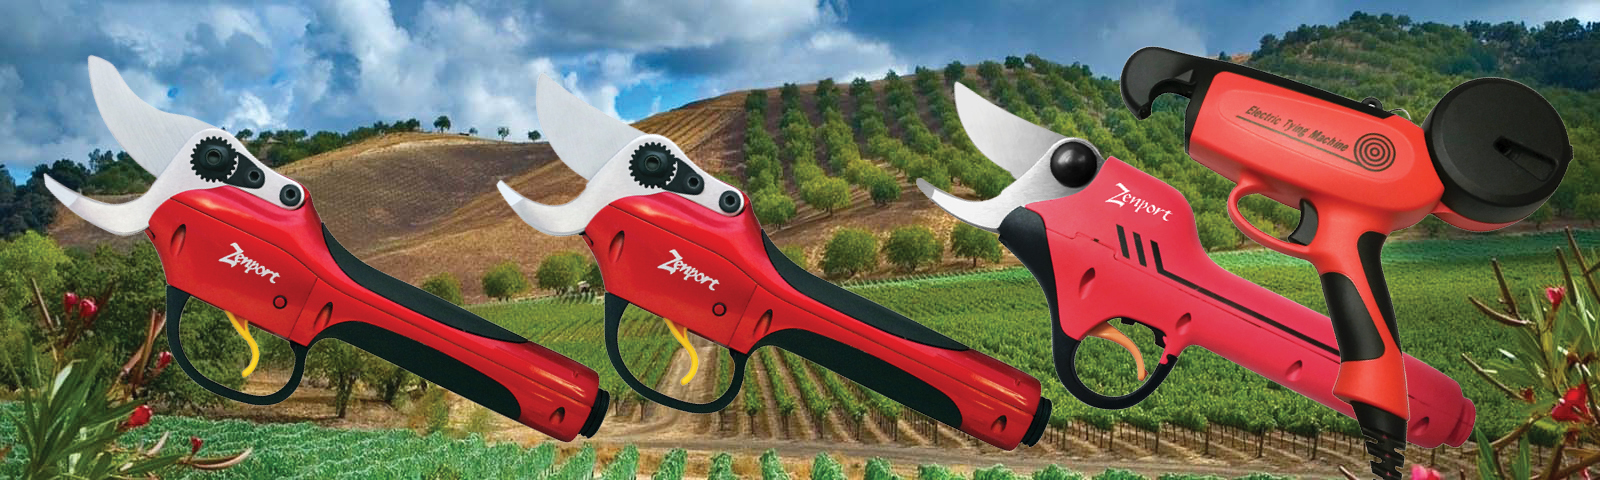 Battery Powered Pruning and Tying Tools